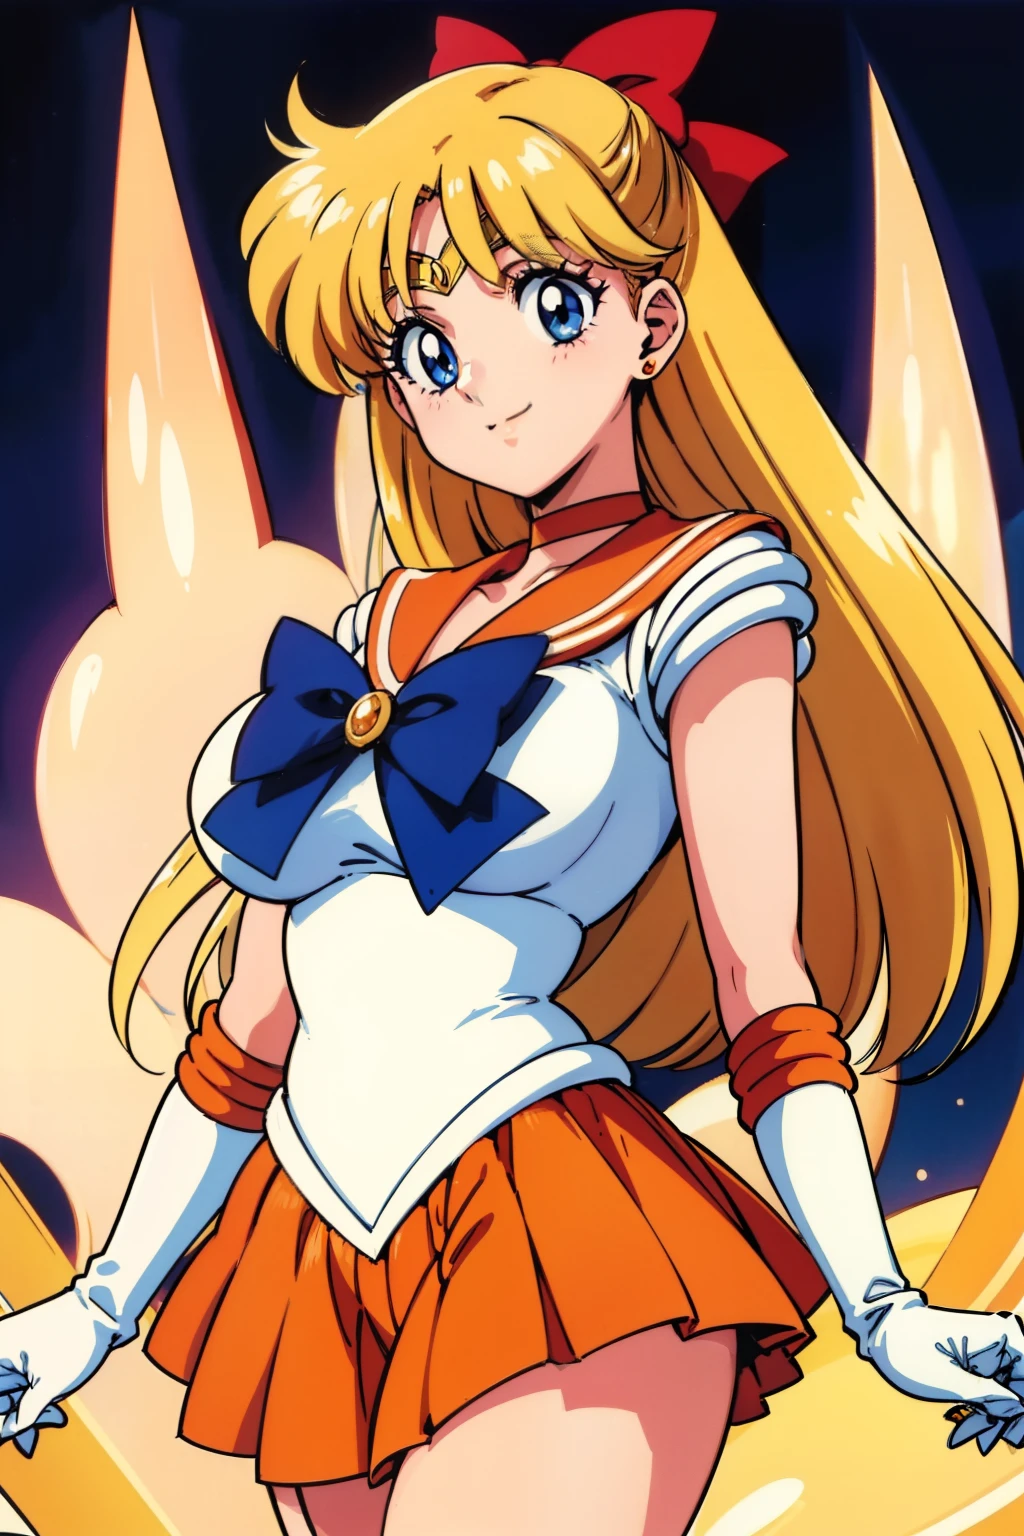 1990s \(style\), 1990s anime cels style, big eyes, Best Quality, High resolution, large breasts, sv1, sailor senshi uniform, orange skirt, elbow gloves, tiara, pleated skirt, orange sailor collar, red bow, orange choker, white gloves, jewelry, smile, night